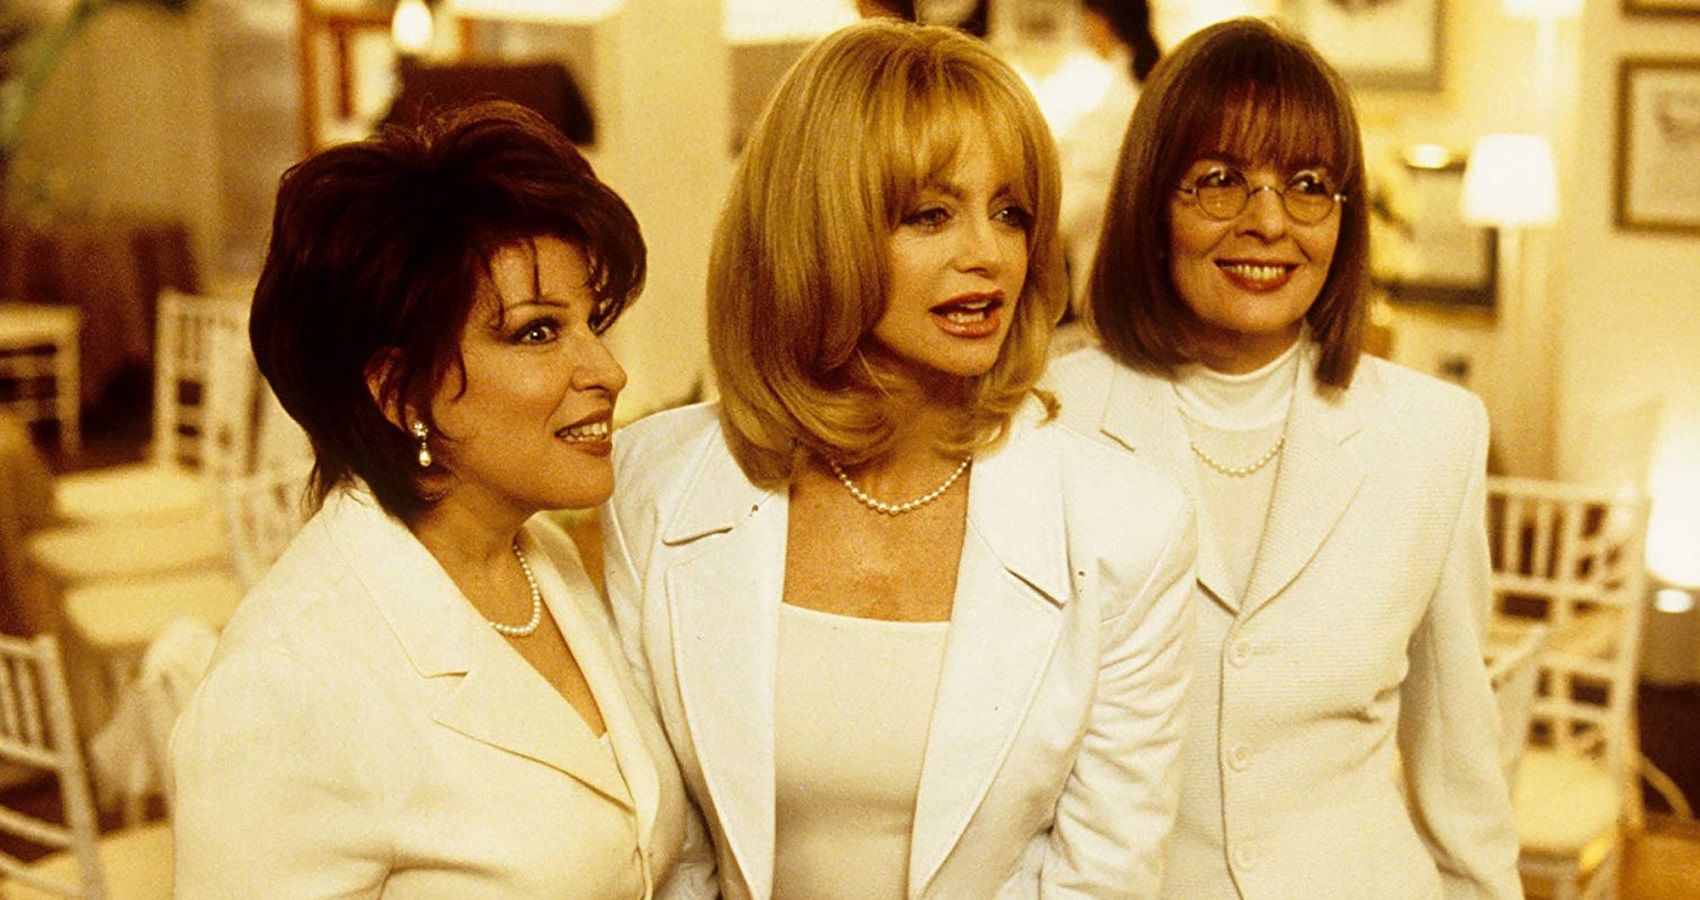 First Wives Club cast Diane Keaton, Goldie Hawn, and Bette Midler in white outfits